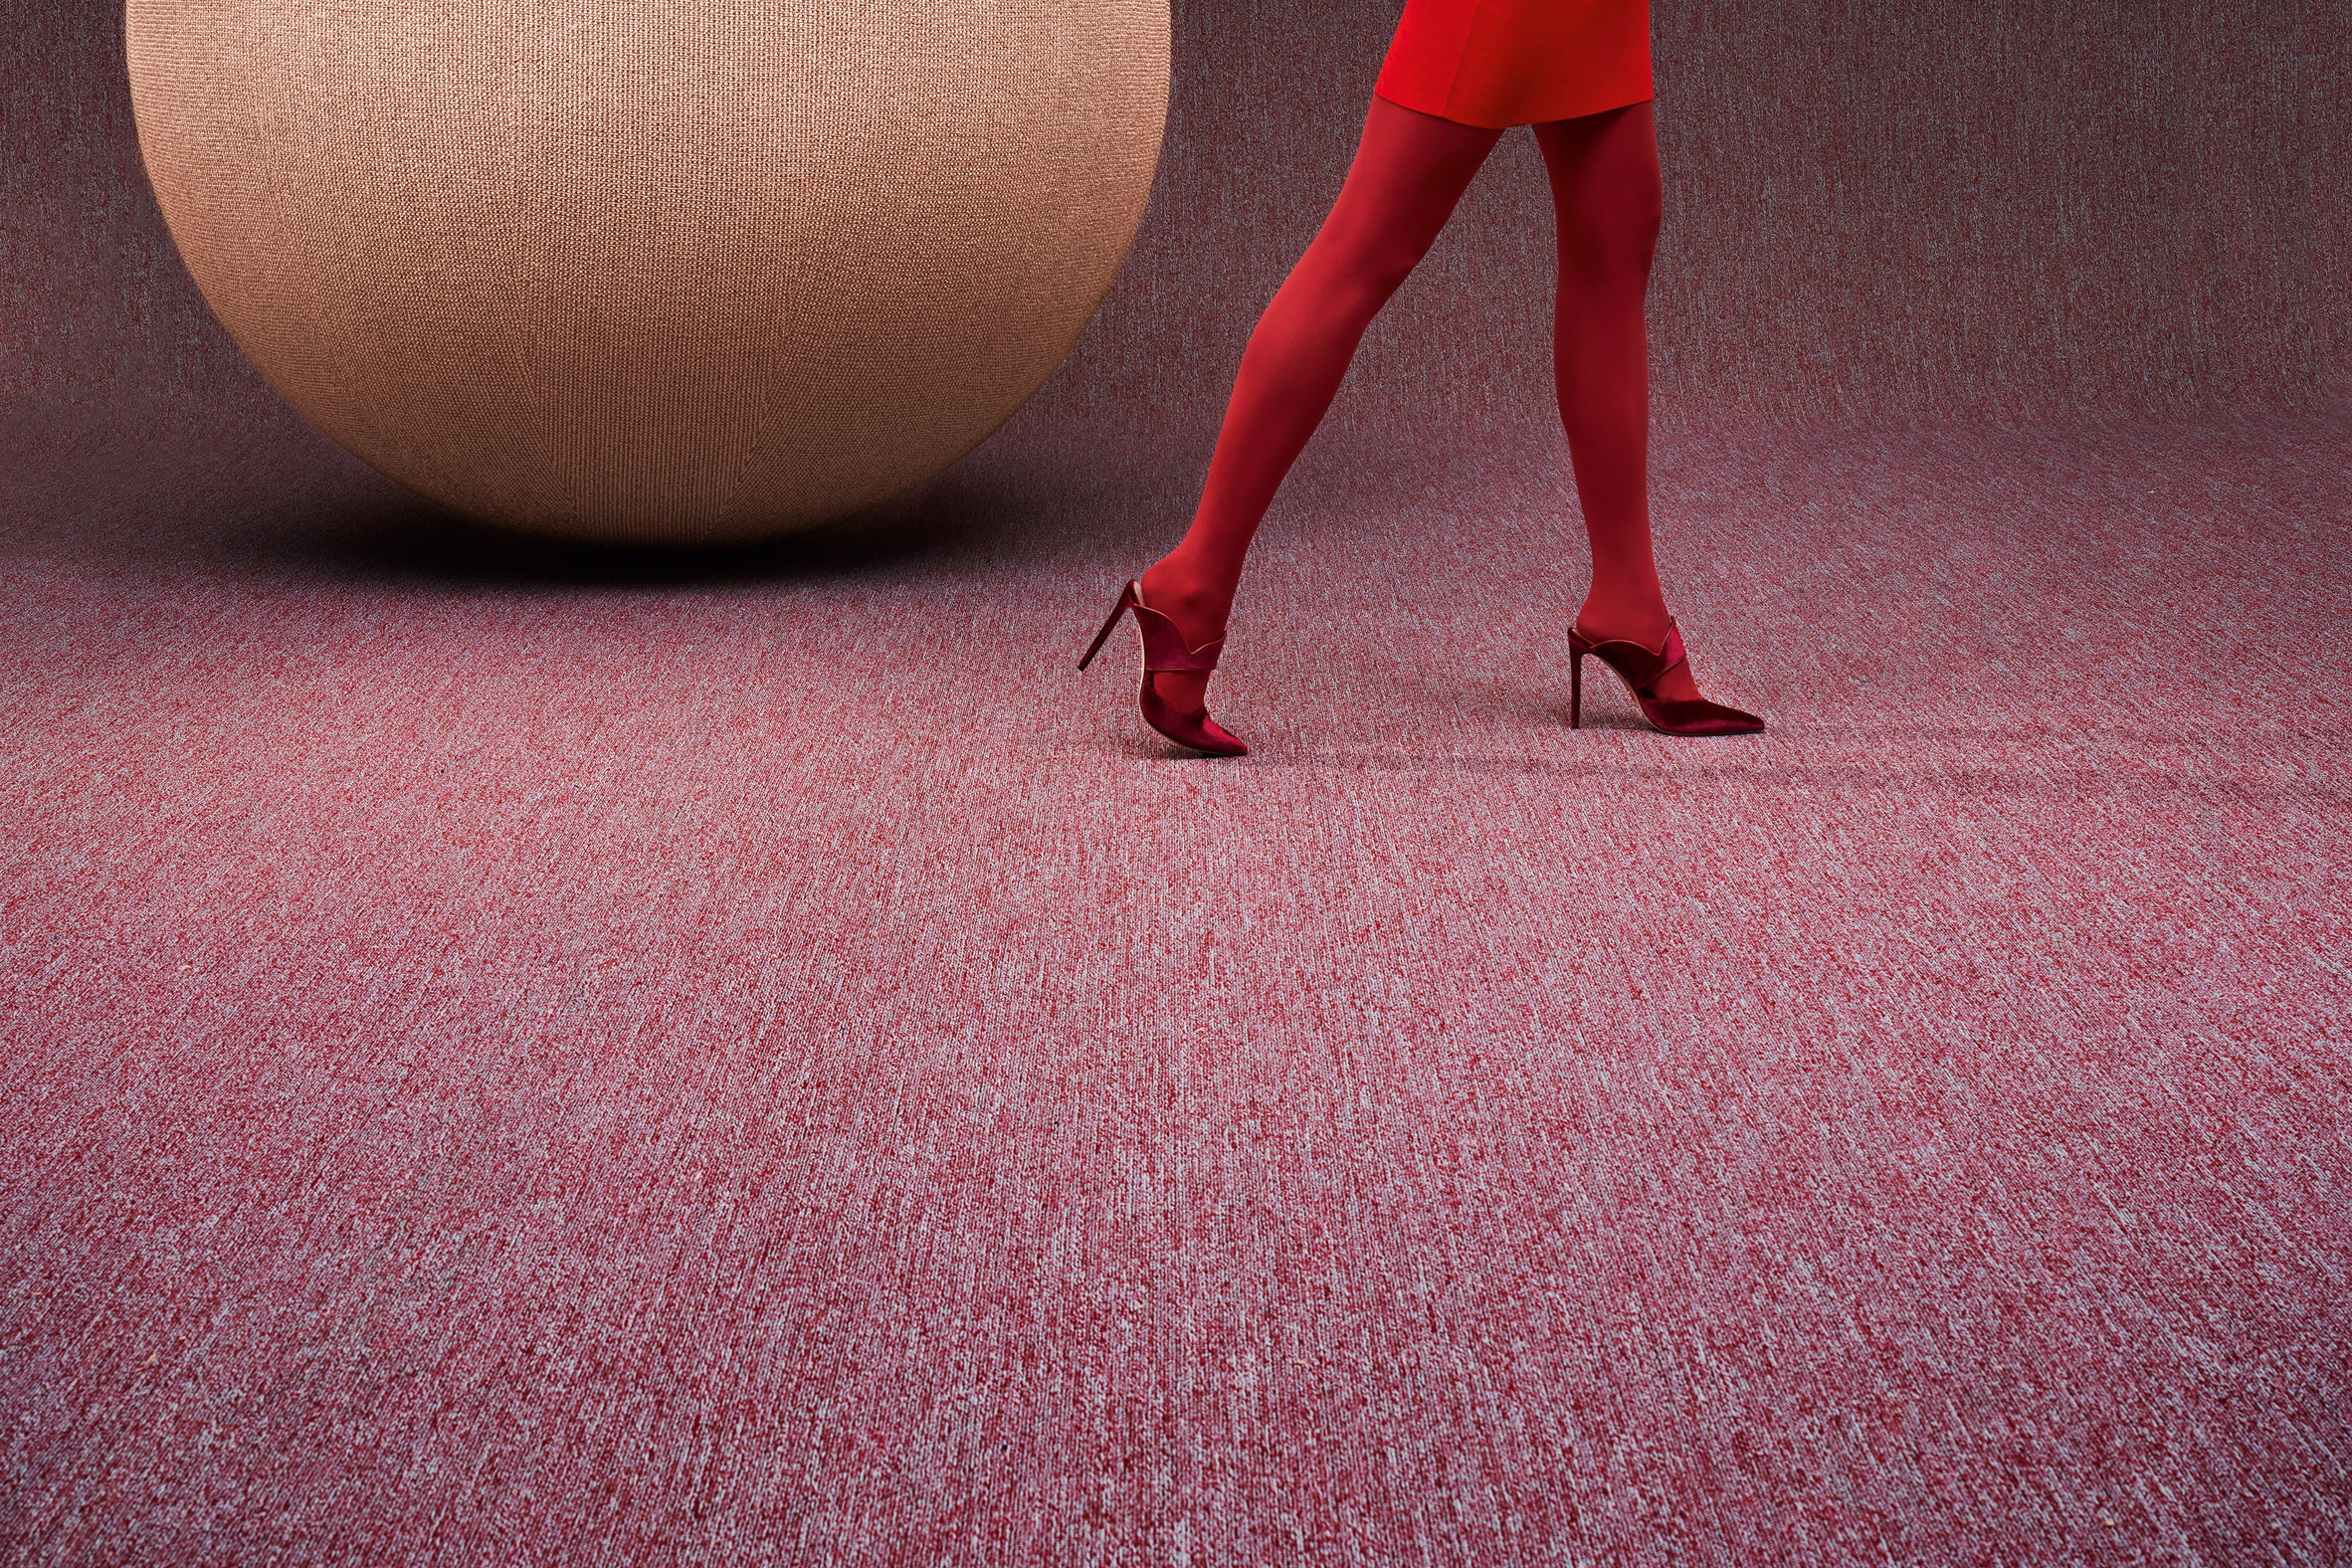 Object Carpet teams up with Ippolito Fleitz Group for new carpet collection